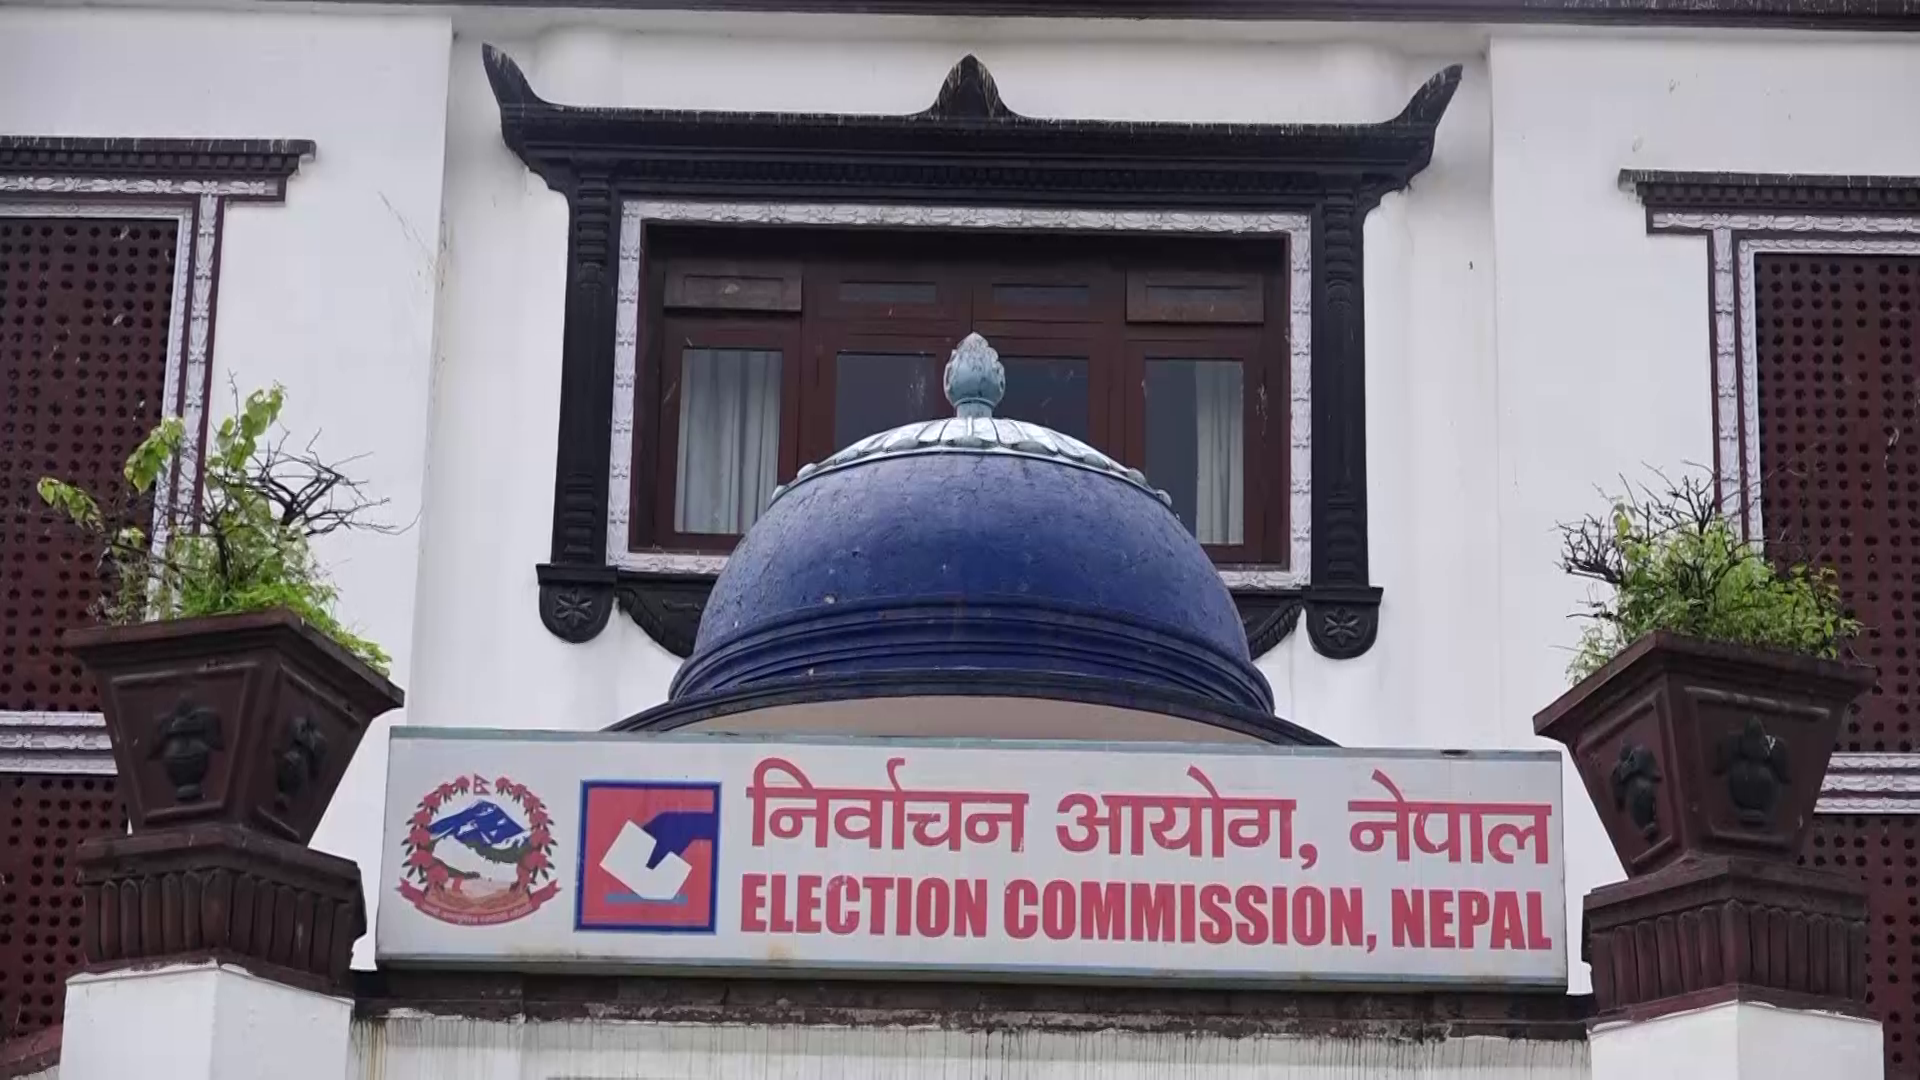 Out of 753 local levels, EC declares result of 740 levels